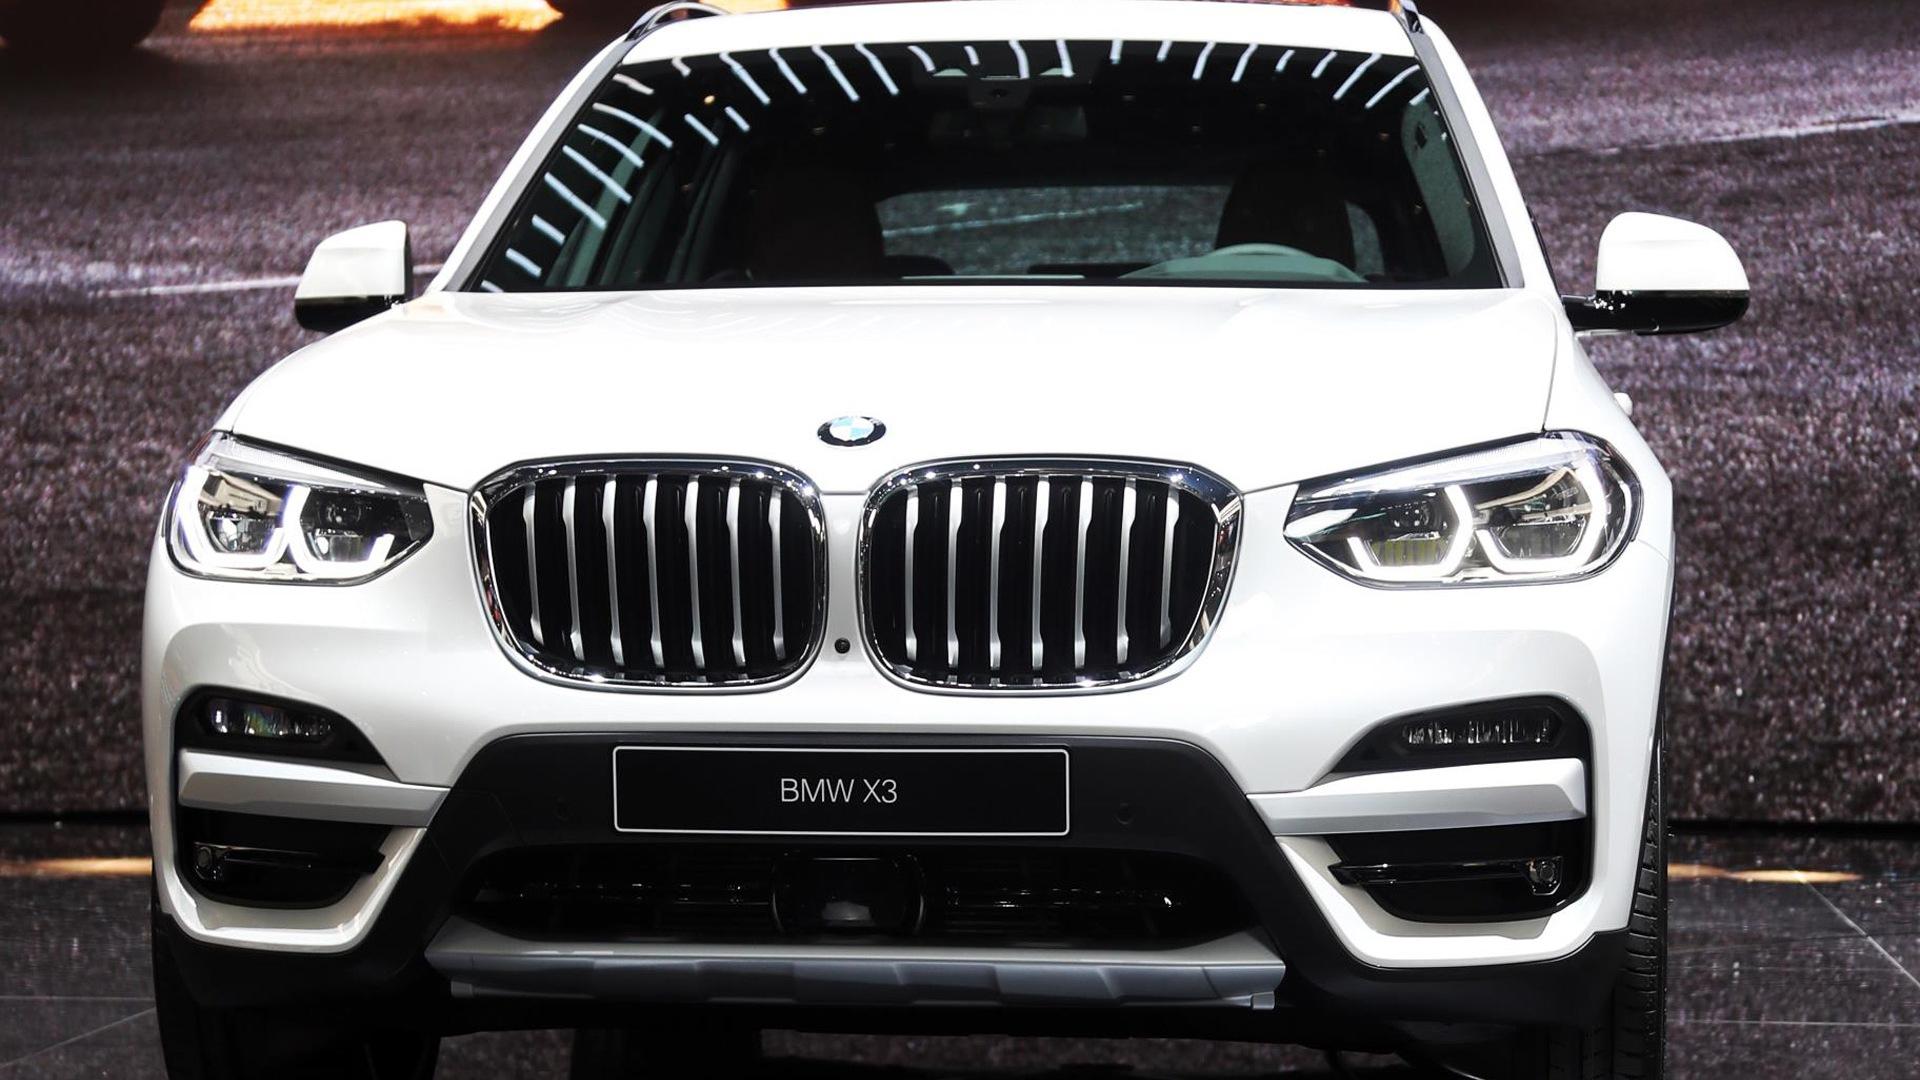 BMW X3 XDrive30e Plug In Hybrid Due In US In 2020